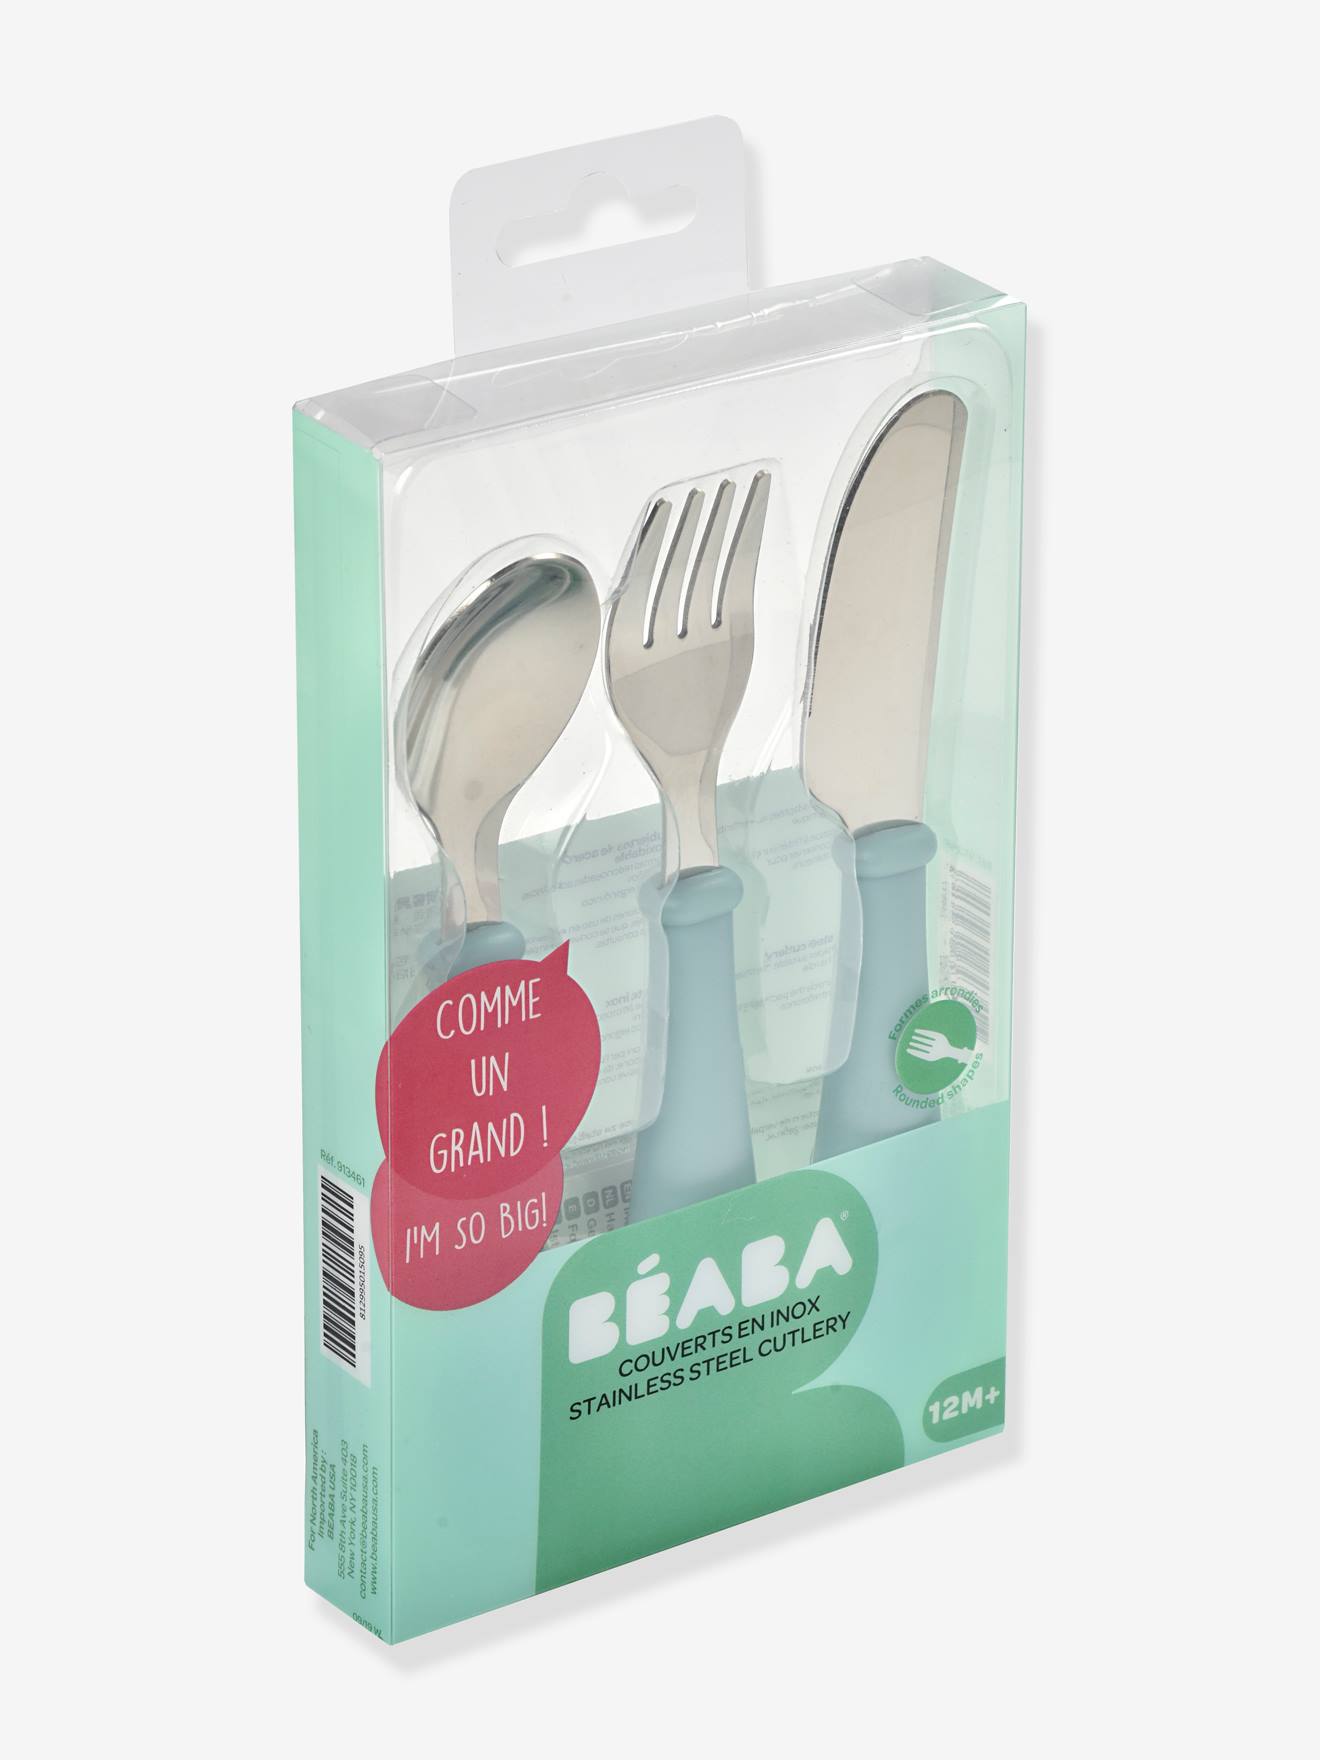 Set 3 couverts d'apprentissage inox BEABA airy green - Béaba